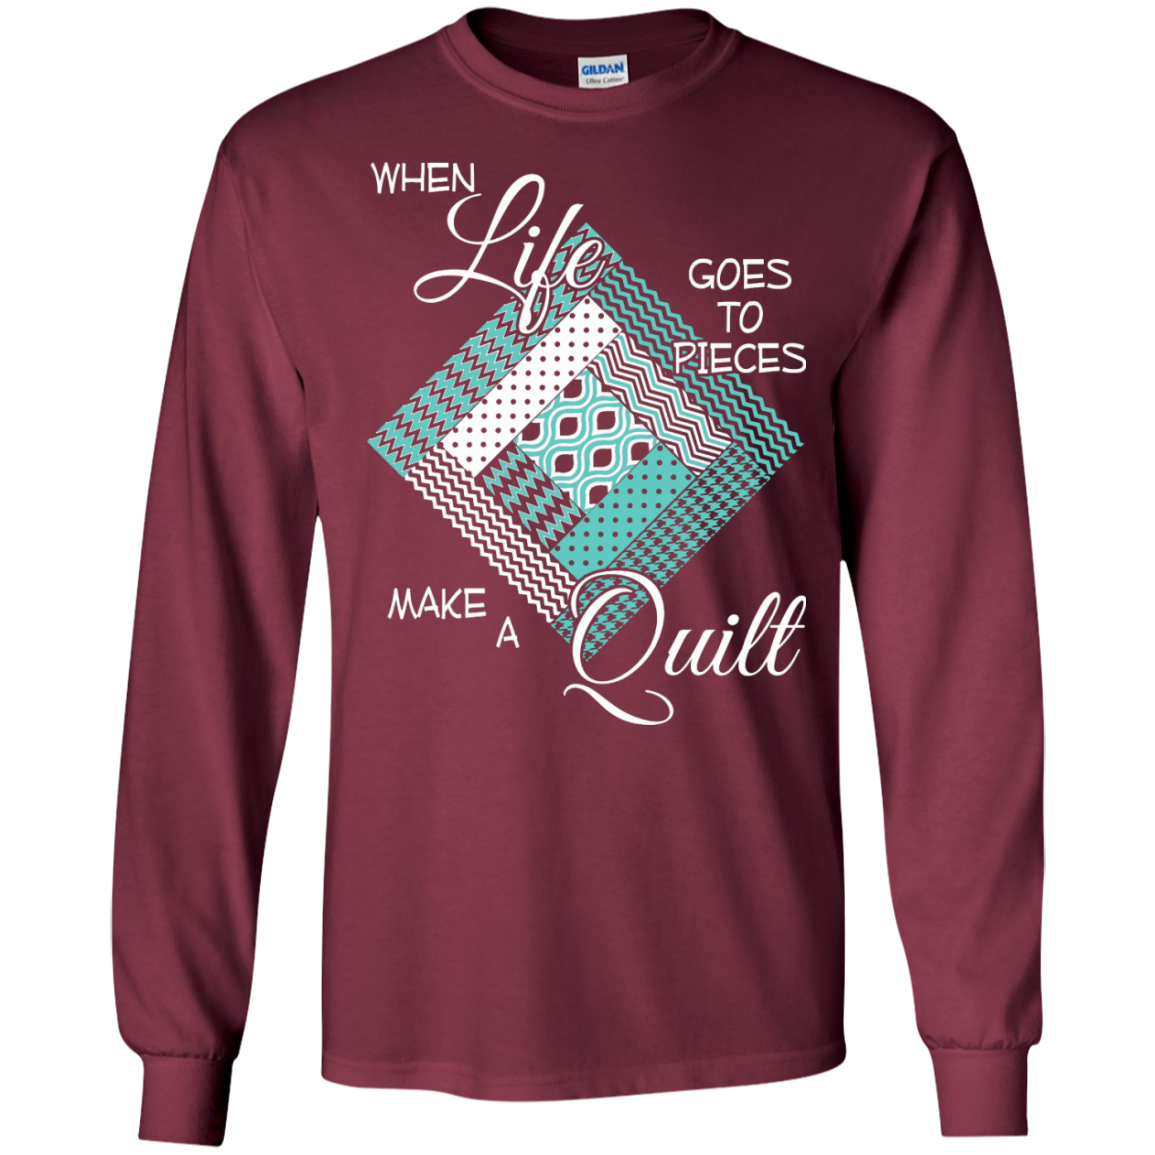 Make a Quilt (turquoise) Long Sleeve Ultra Cotton T-Shirt - Crafter4Life - 4